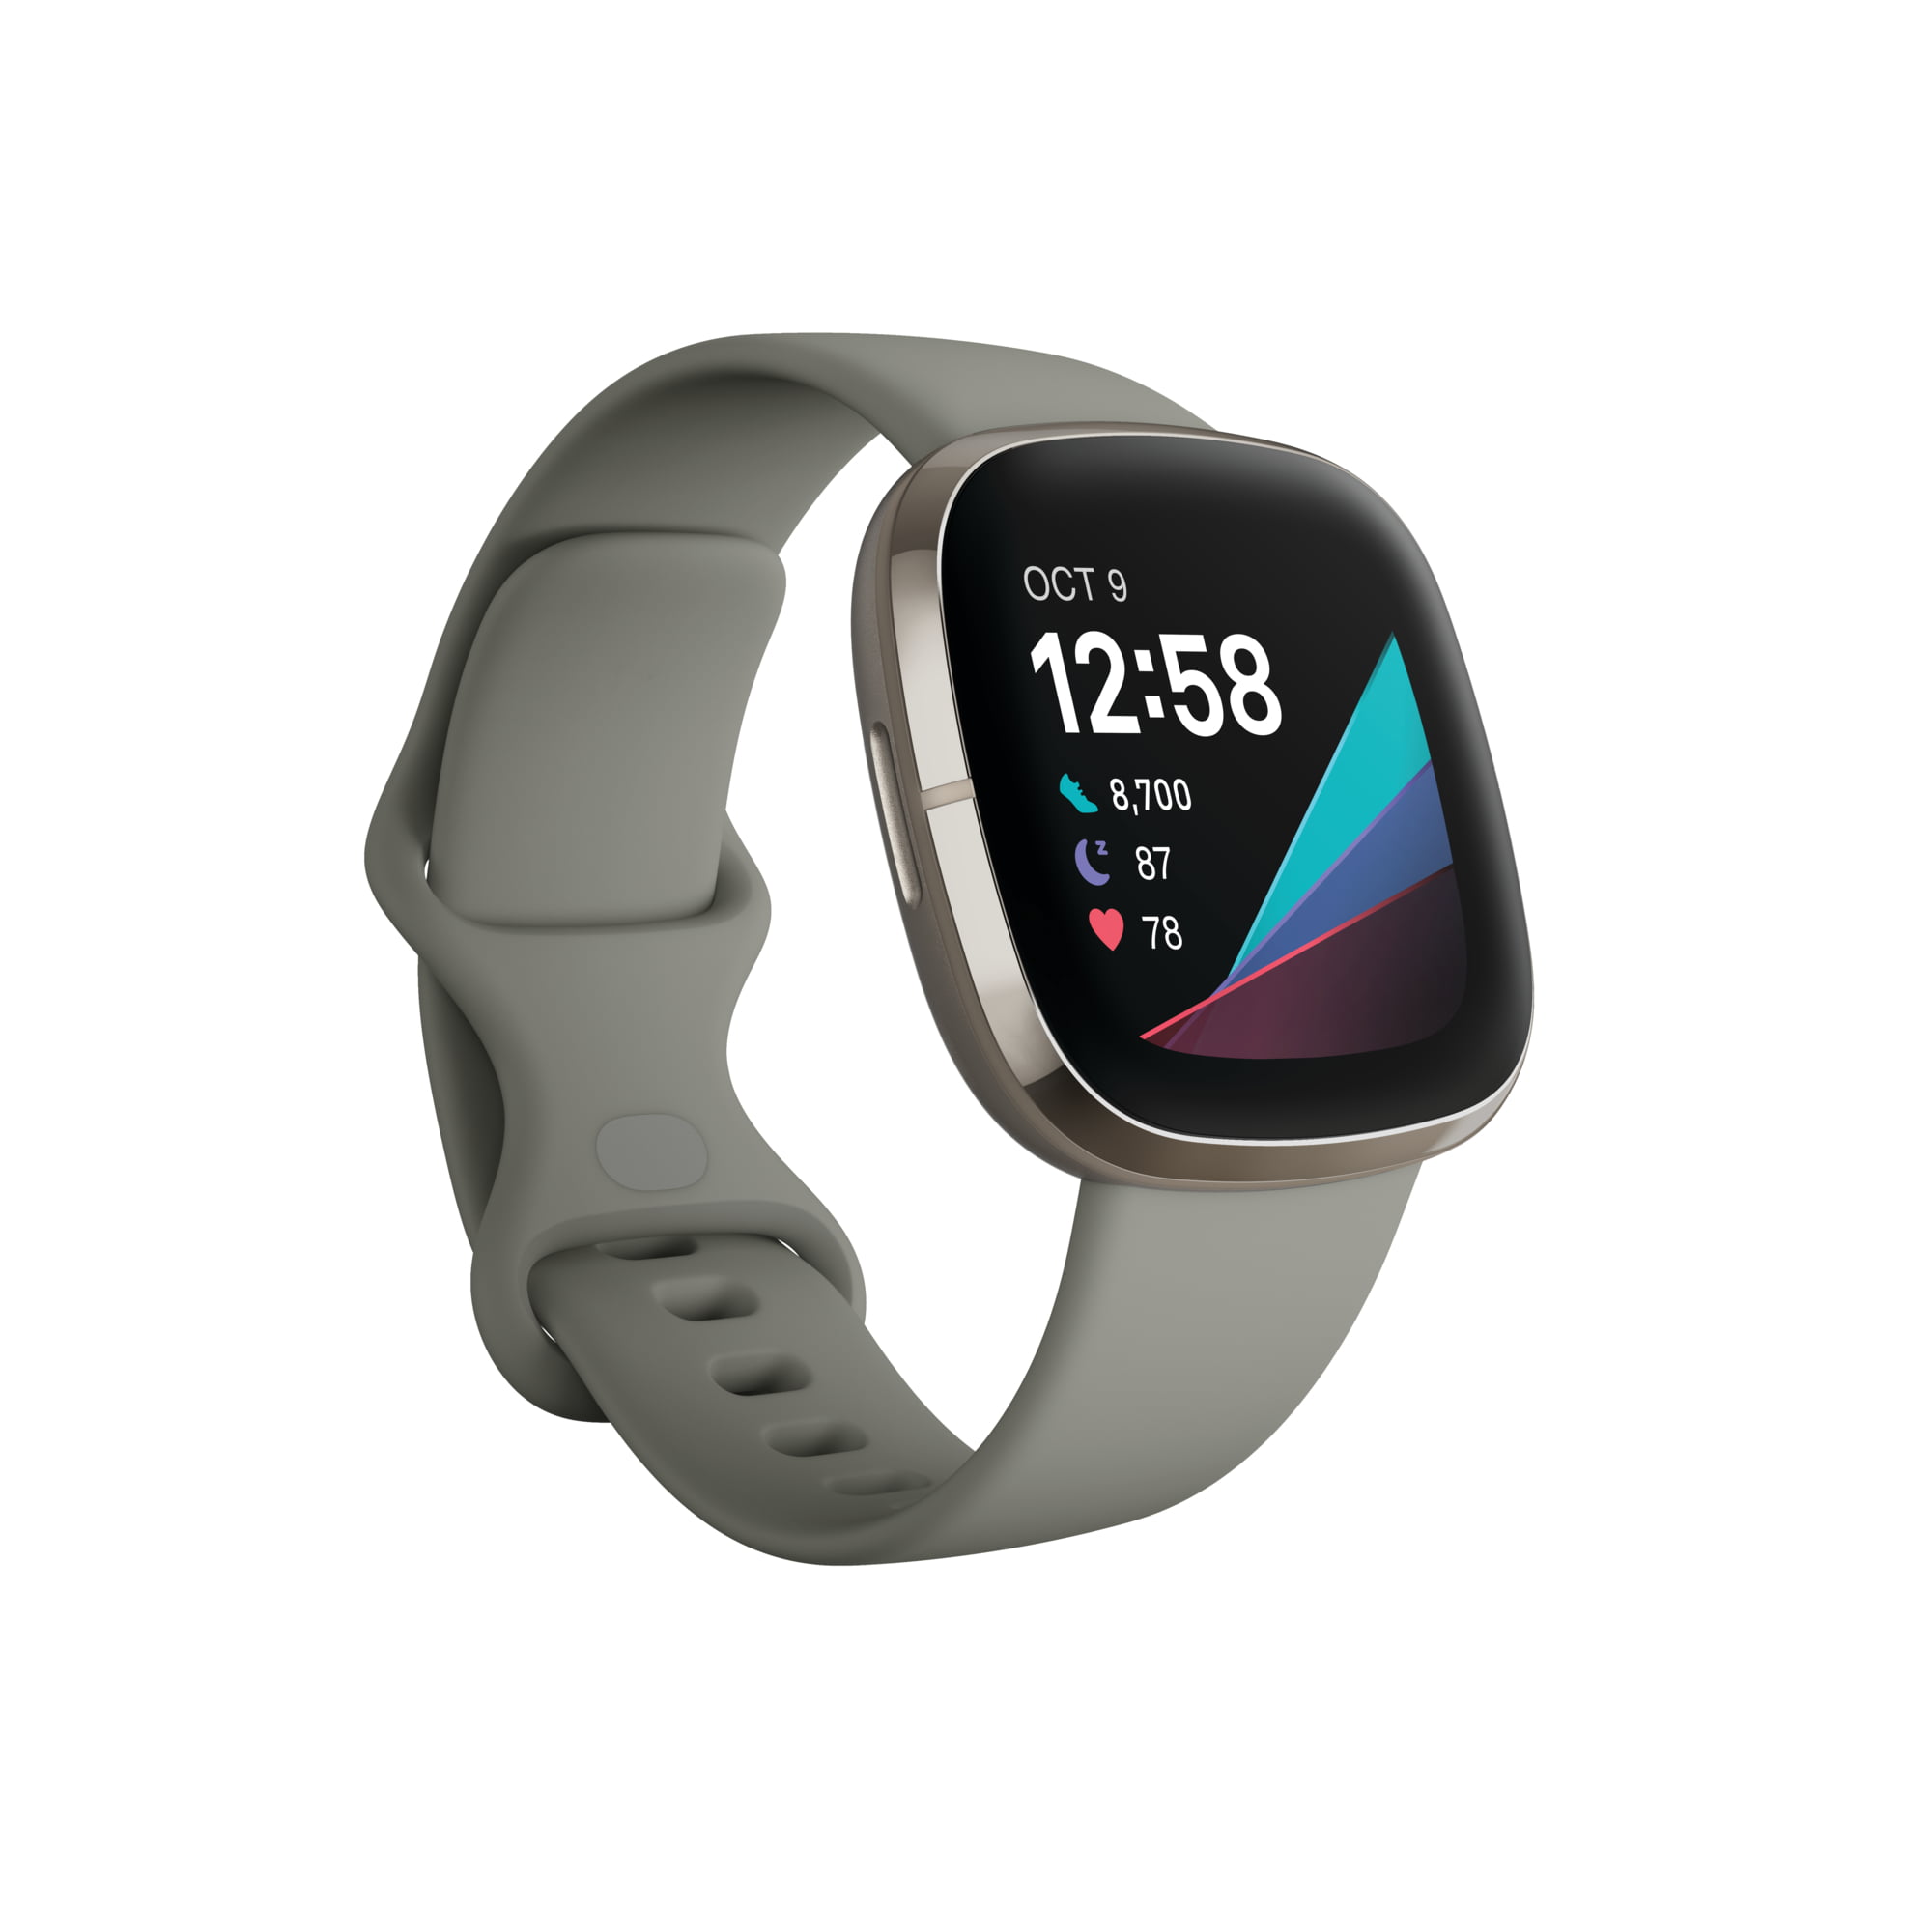 Apple Watch Series 5 (GPS, 40mm) - Space Gray Aluminum Case with 